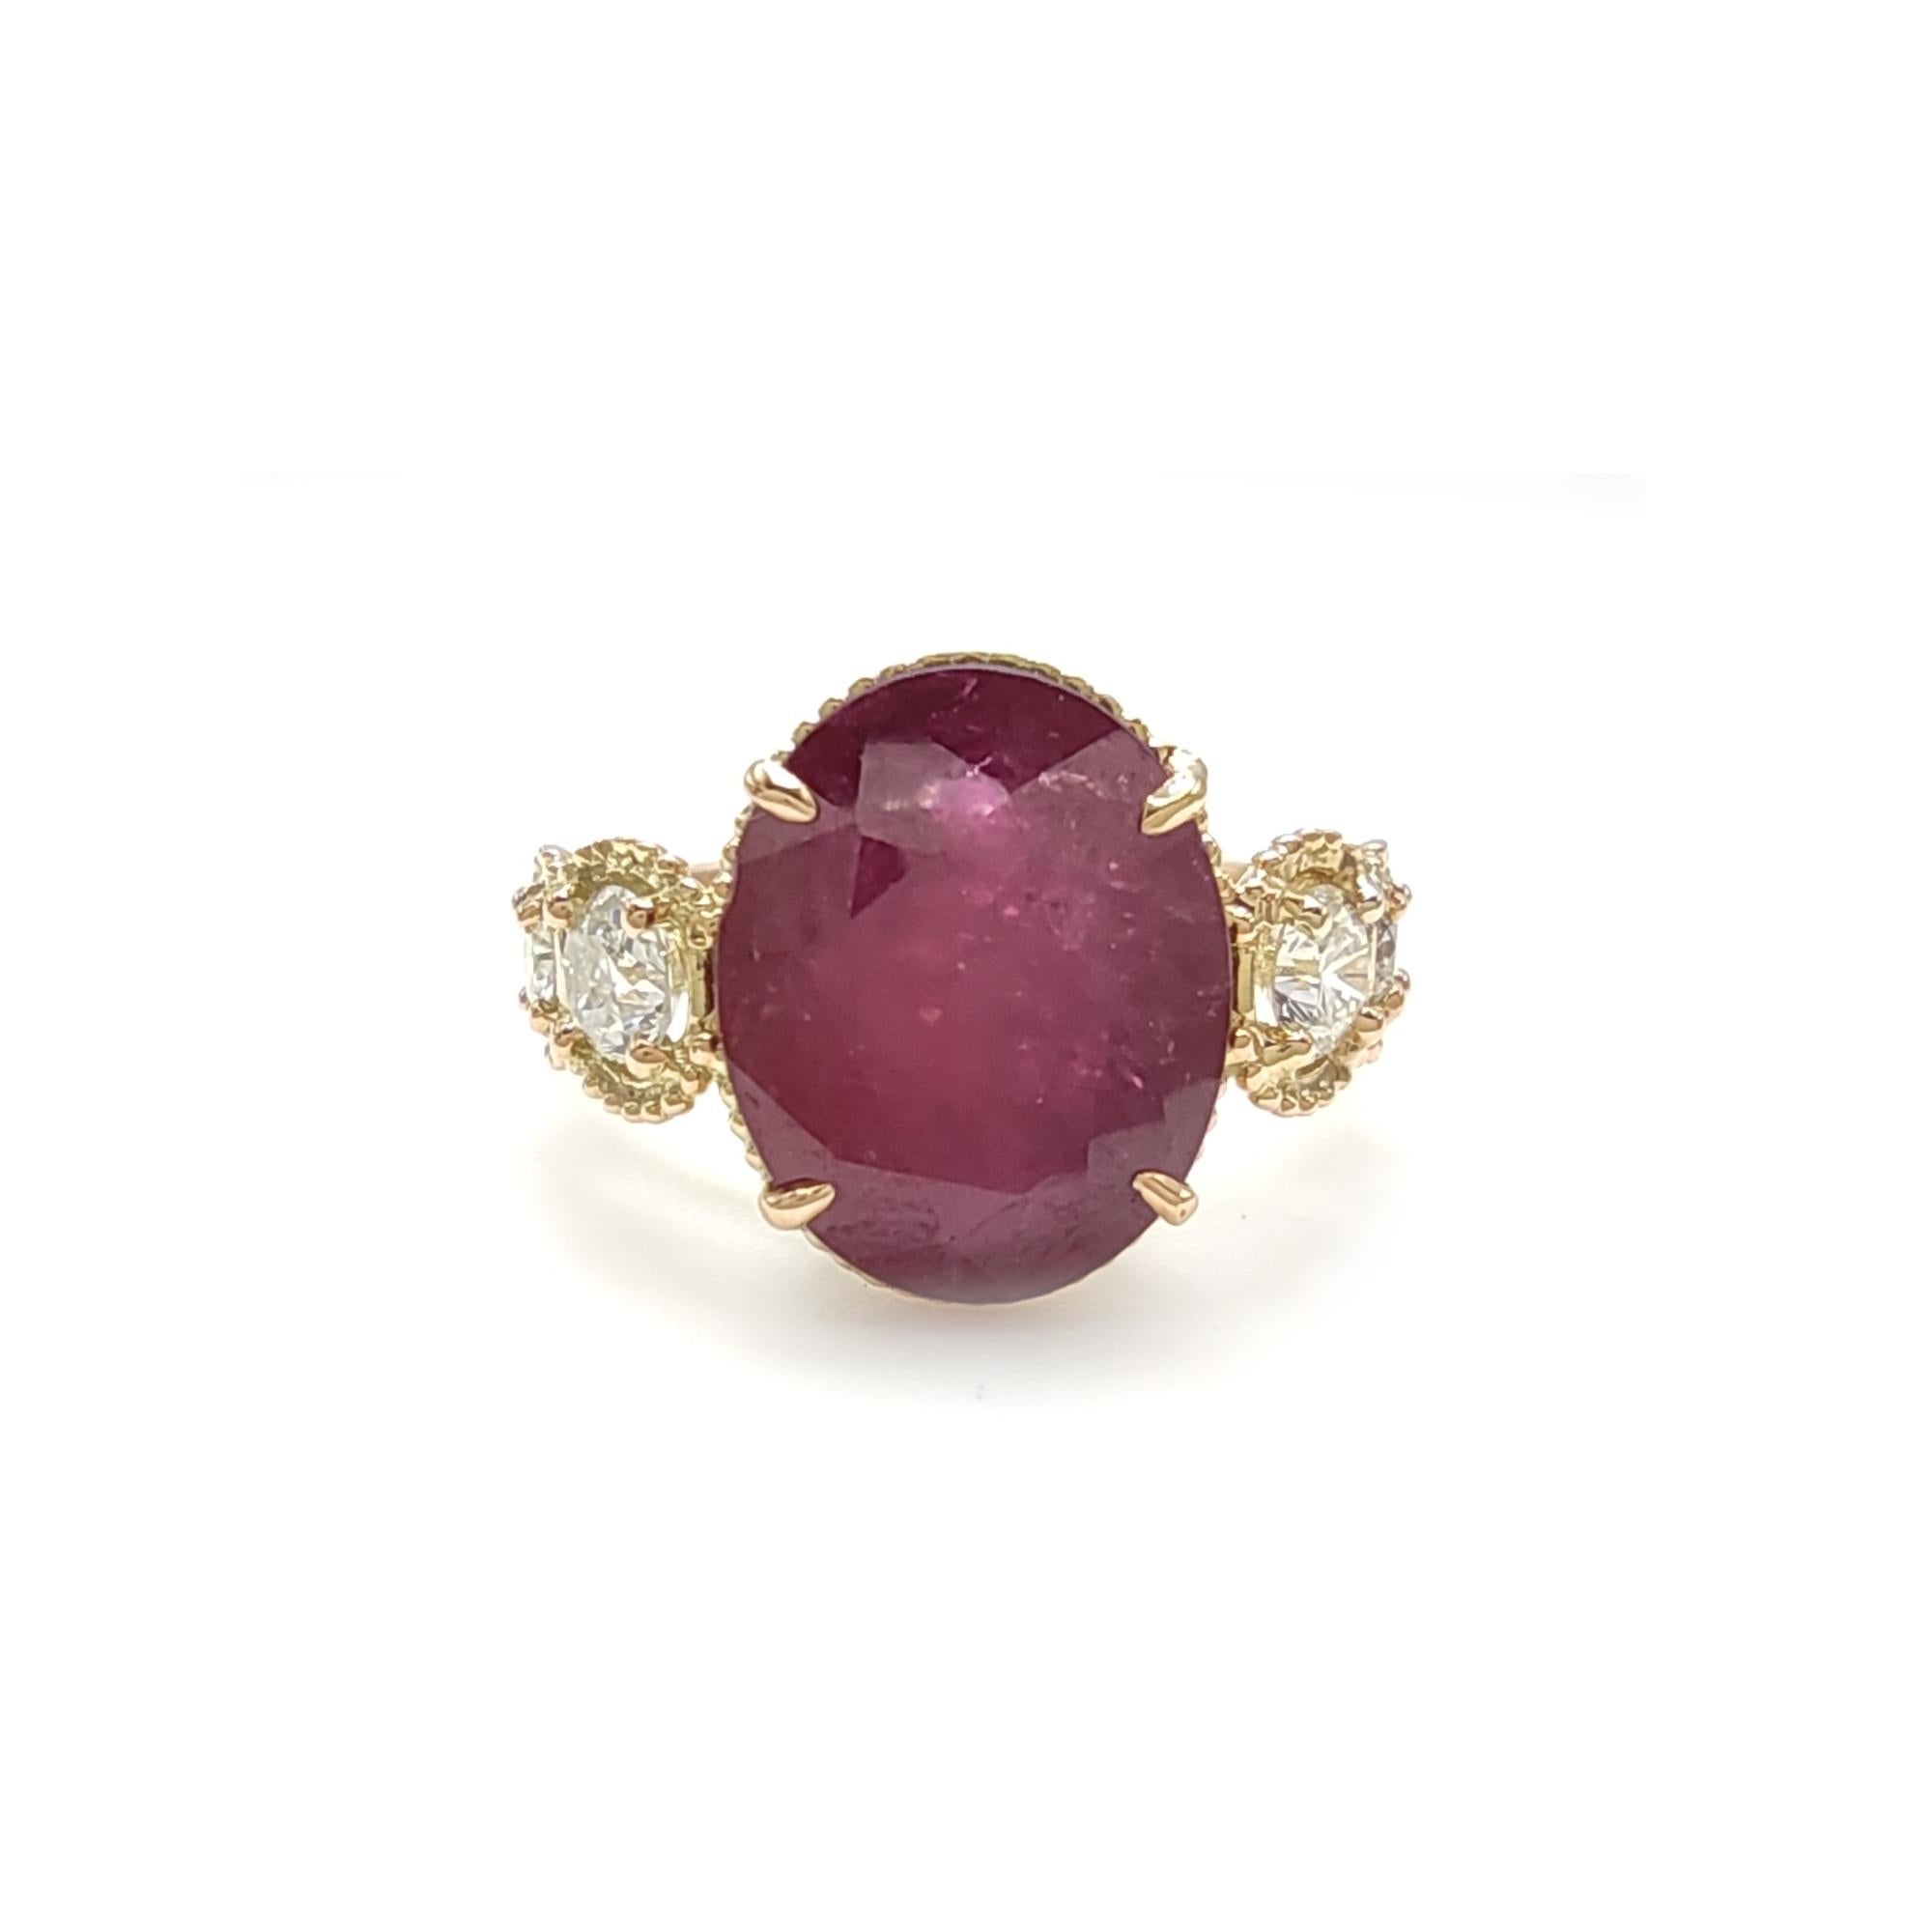 Certified 4.17 carats Ruby Diamond 14K Gold Ring - Contemporary Handmade For Sale 1